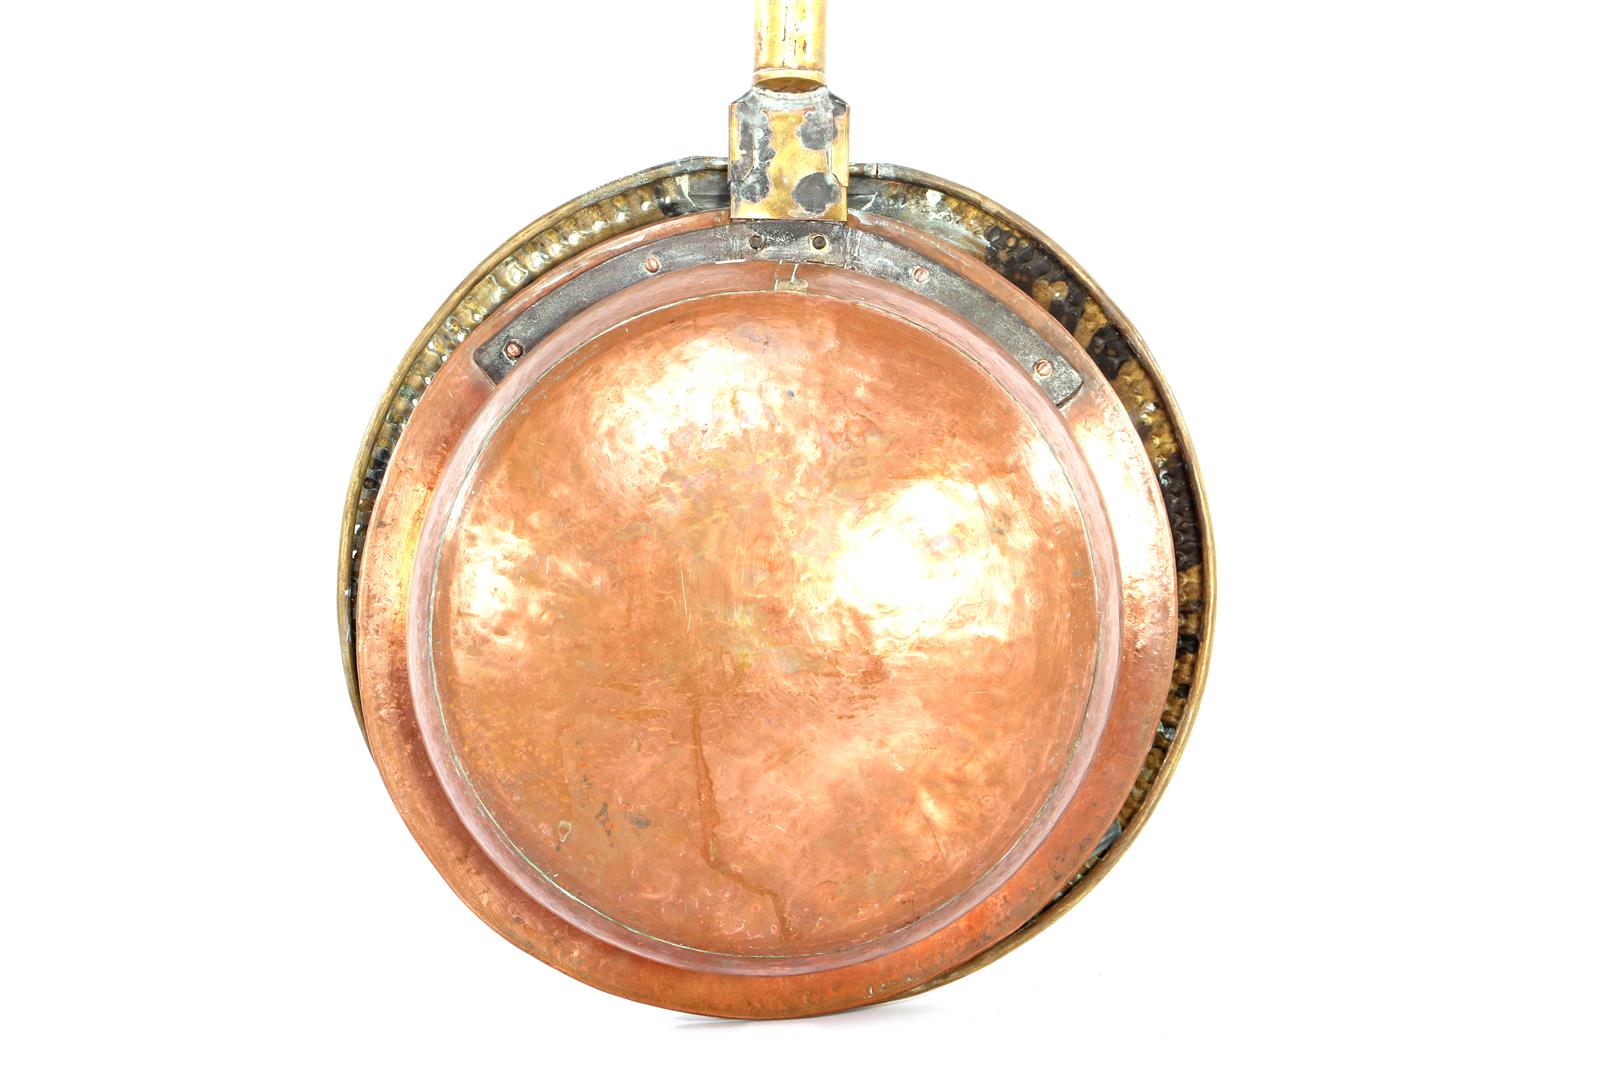 19th century bedpan with copper tray with flap - Image 6 of 6